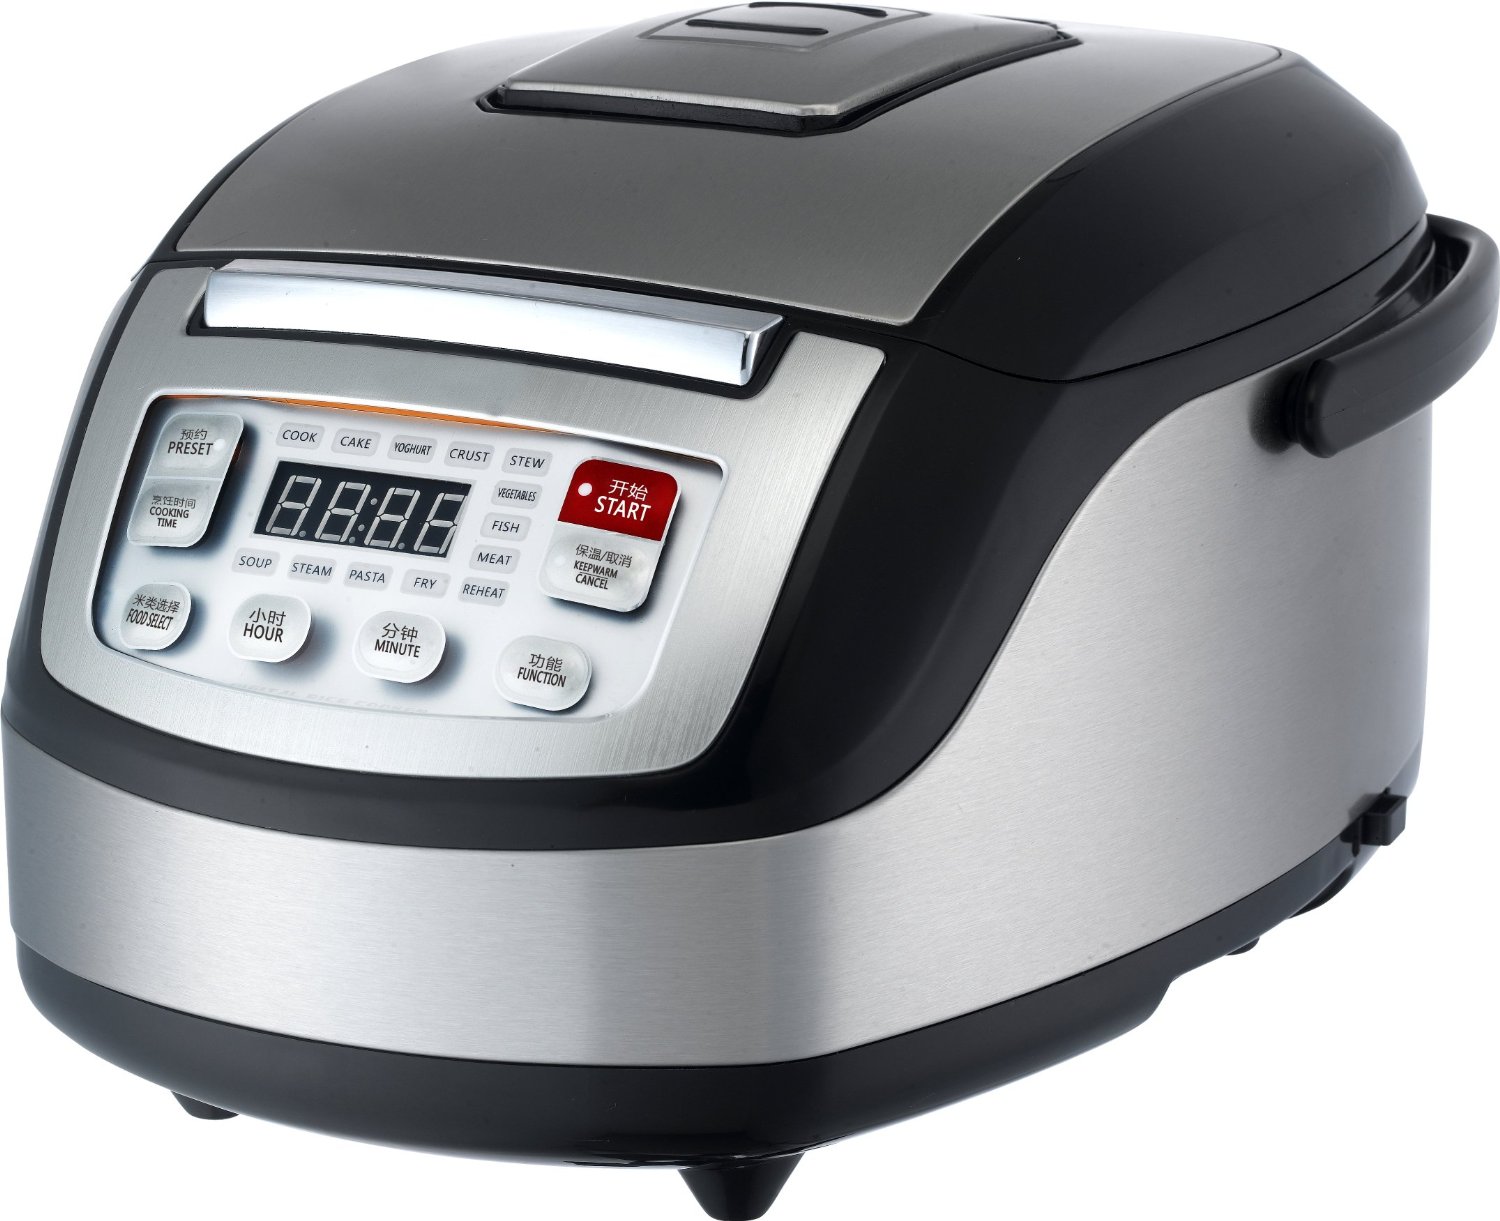 Hiro 13-in-1 Asian-style Multifunctional Rice Cooker (Eb-fc57)